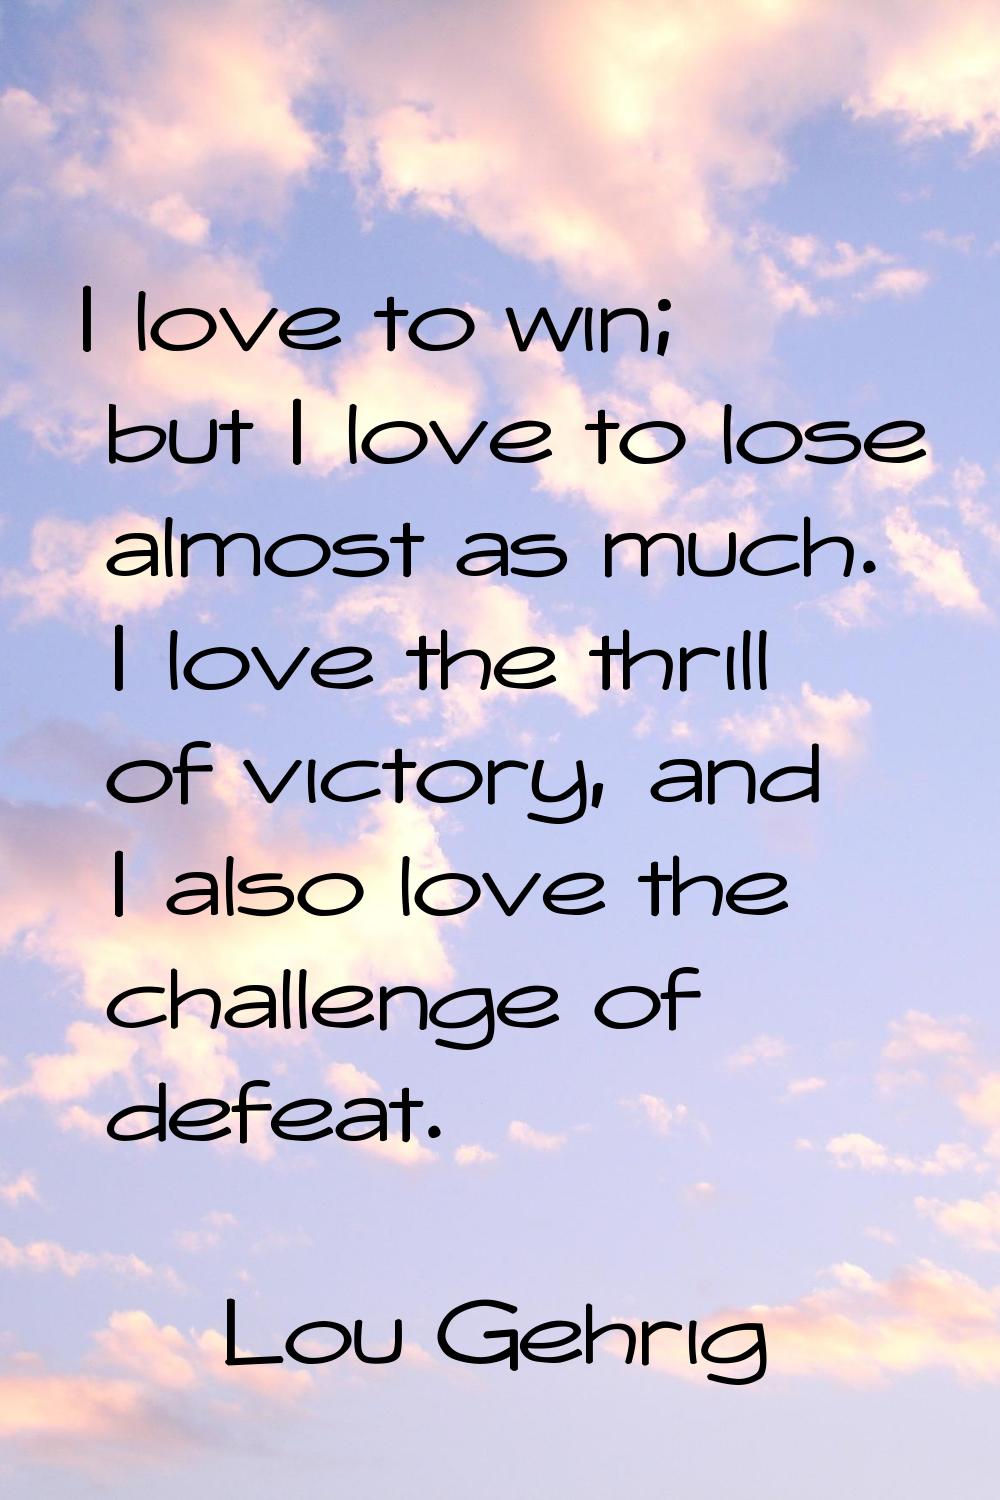 I love to win; but I love to lose almost as much. I love the thrill of victory, and I also love the